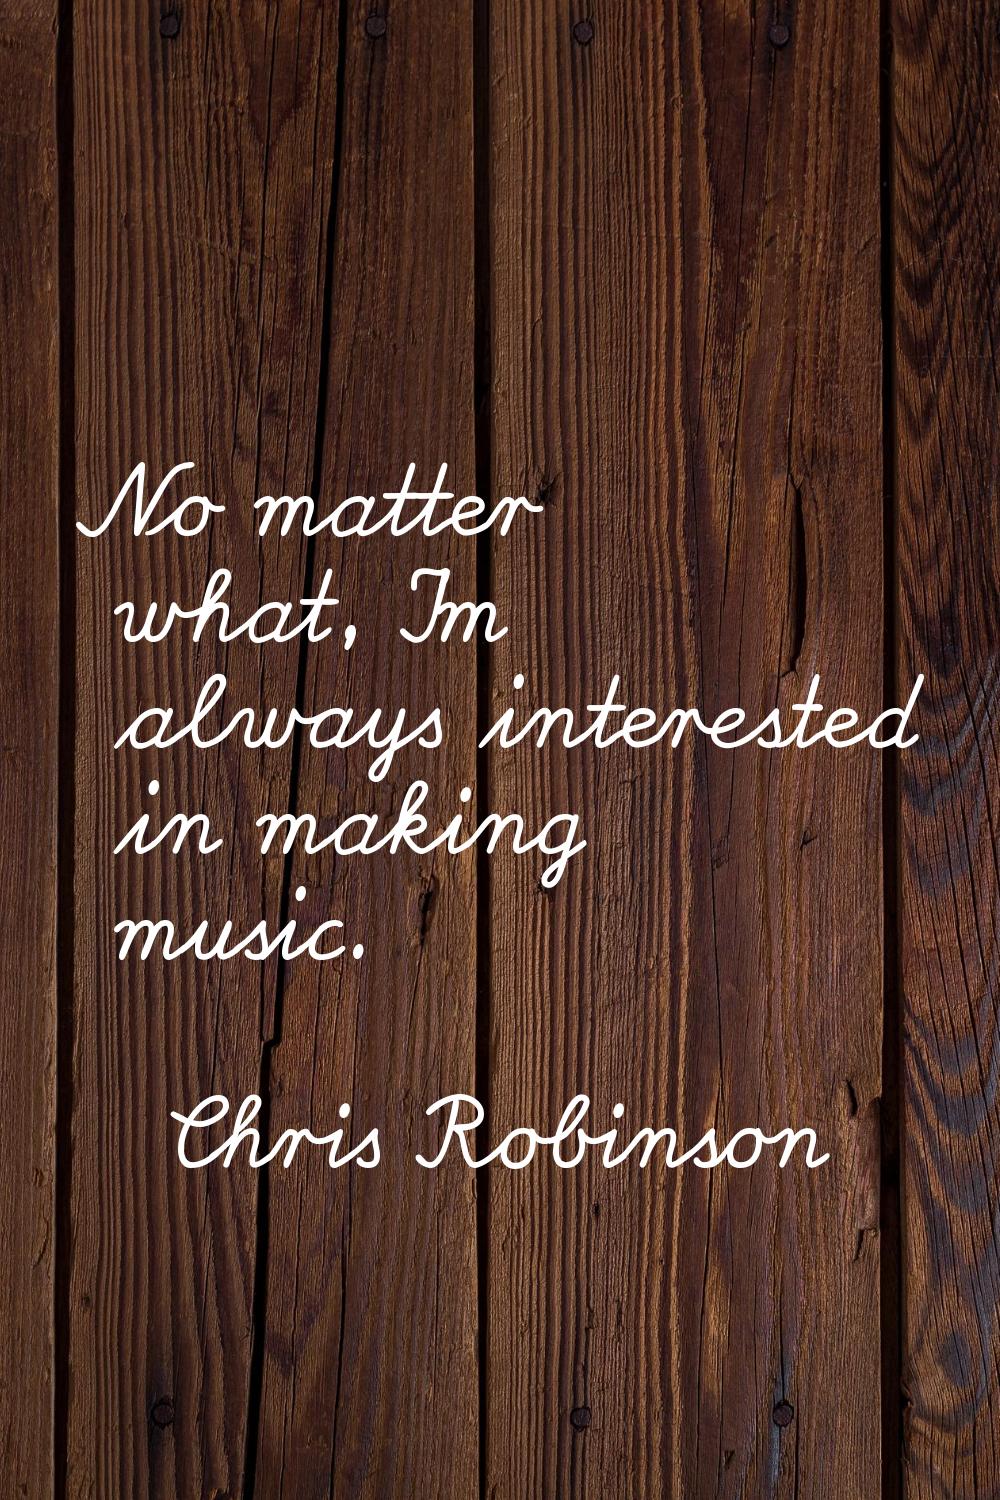 No matter what, I'm always interested in making music.